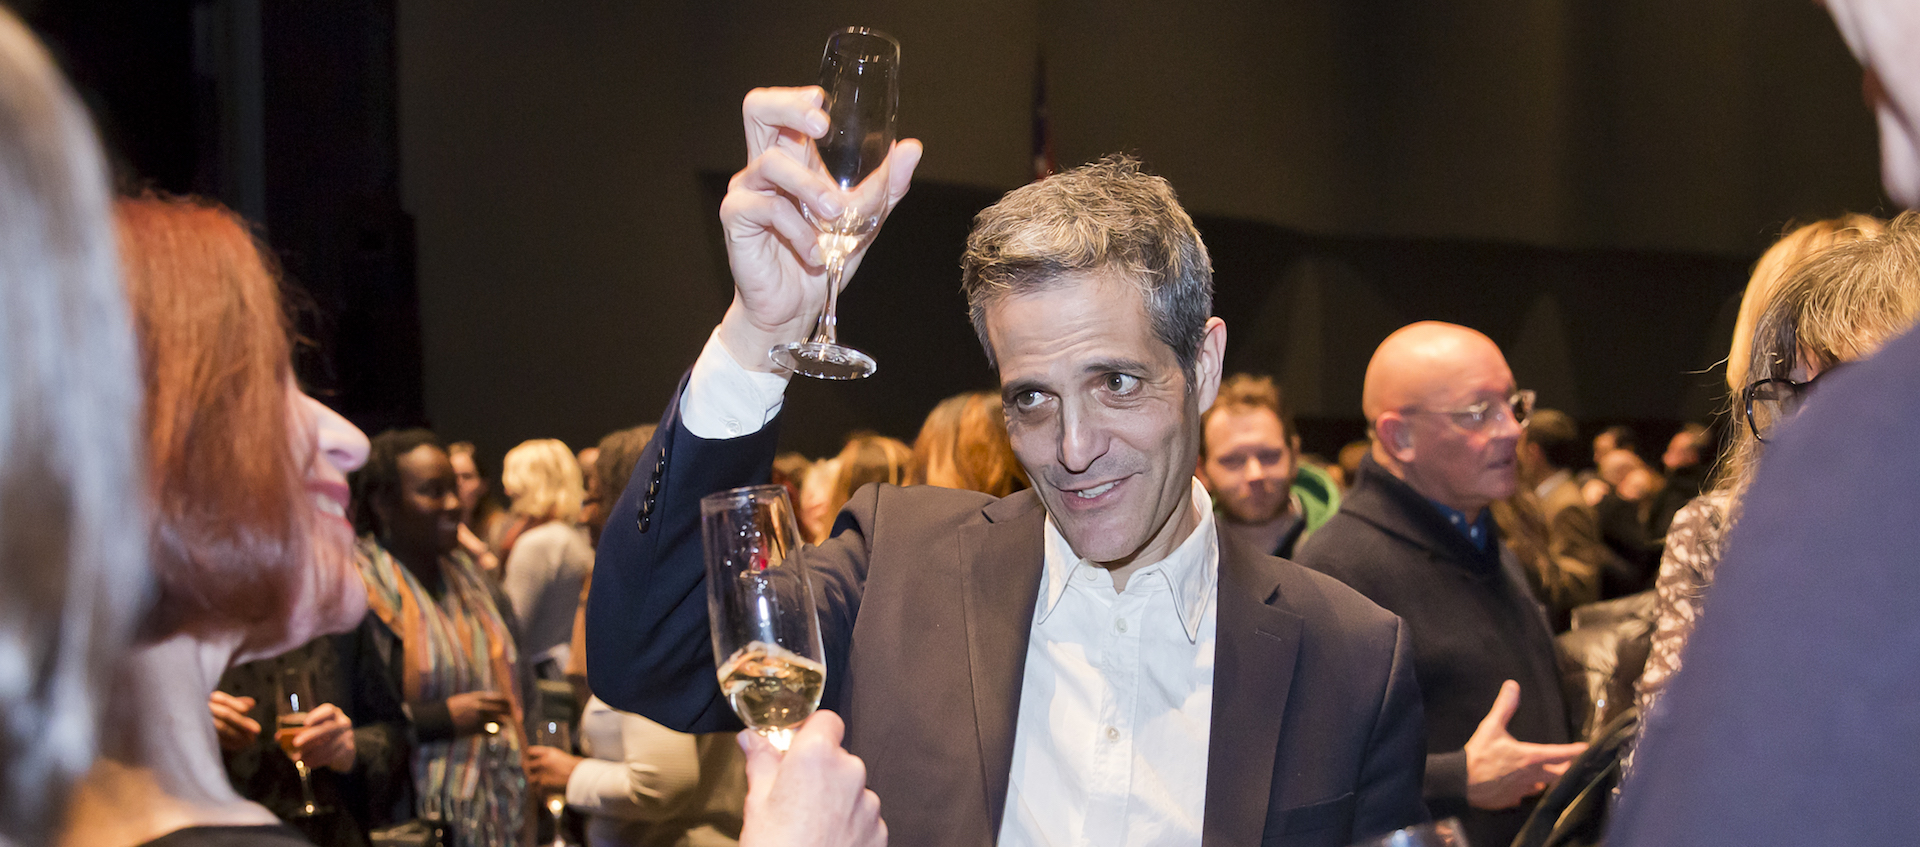 Filmmaker Sam Green has a champagne toast with Wexner Center for the Arts Director Sherri Geldin and the center's Film/Video team following the performance of "A Thousand Thoughts: Sam Green and Kronos Quartet" on January 25, 2018. Photo: Katie Spengler